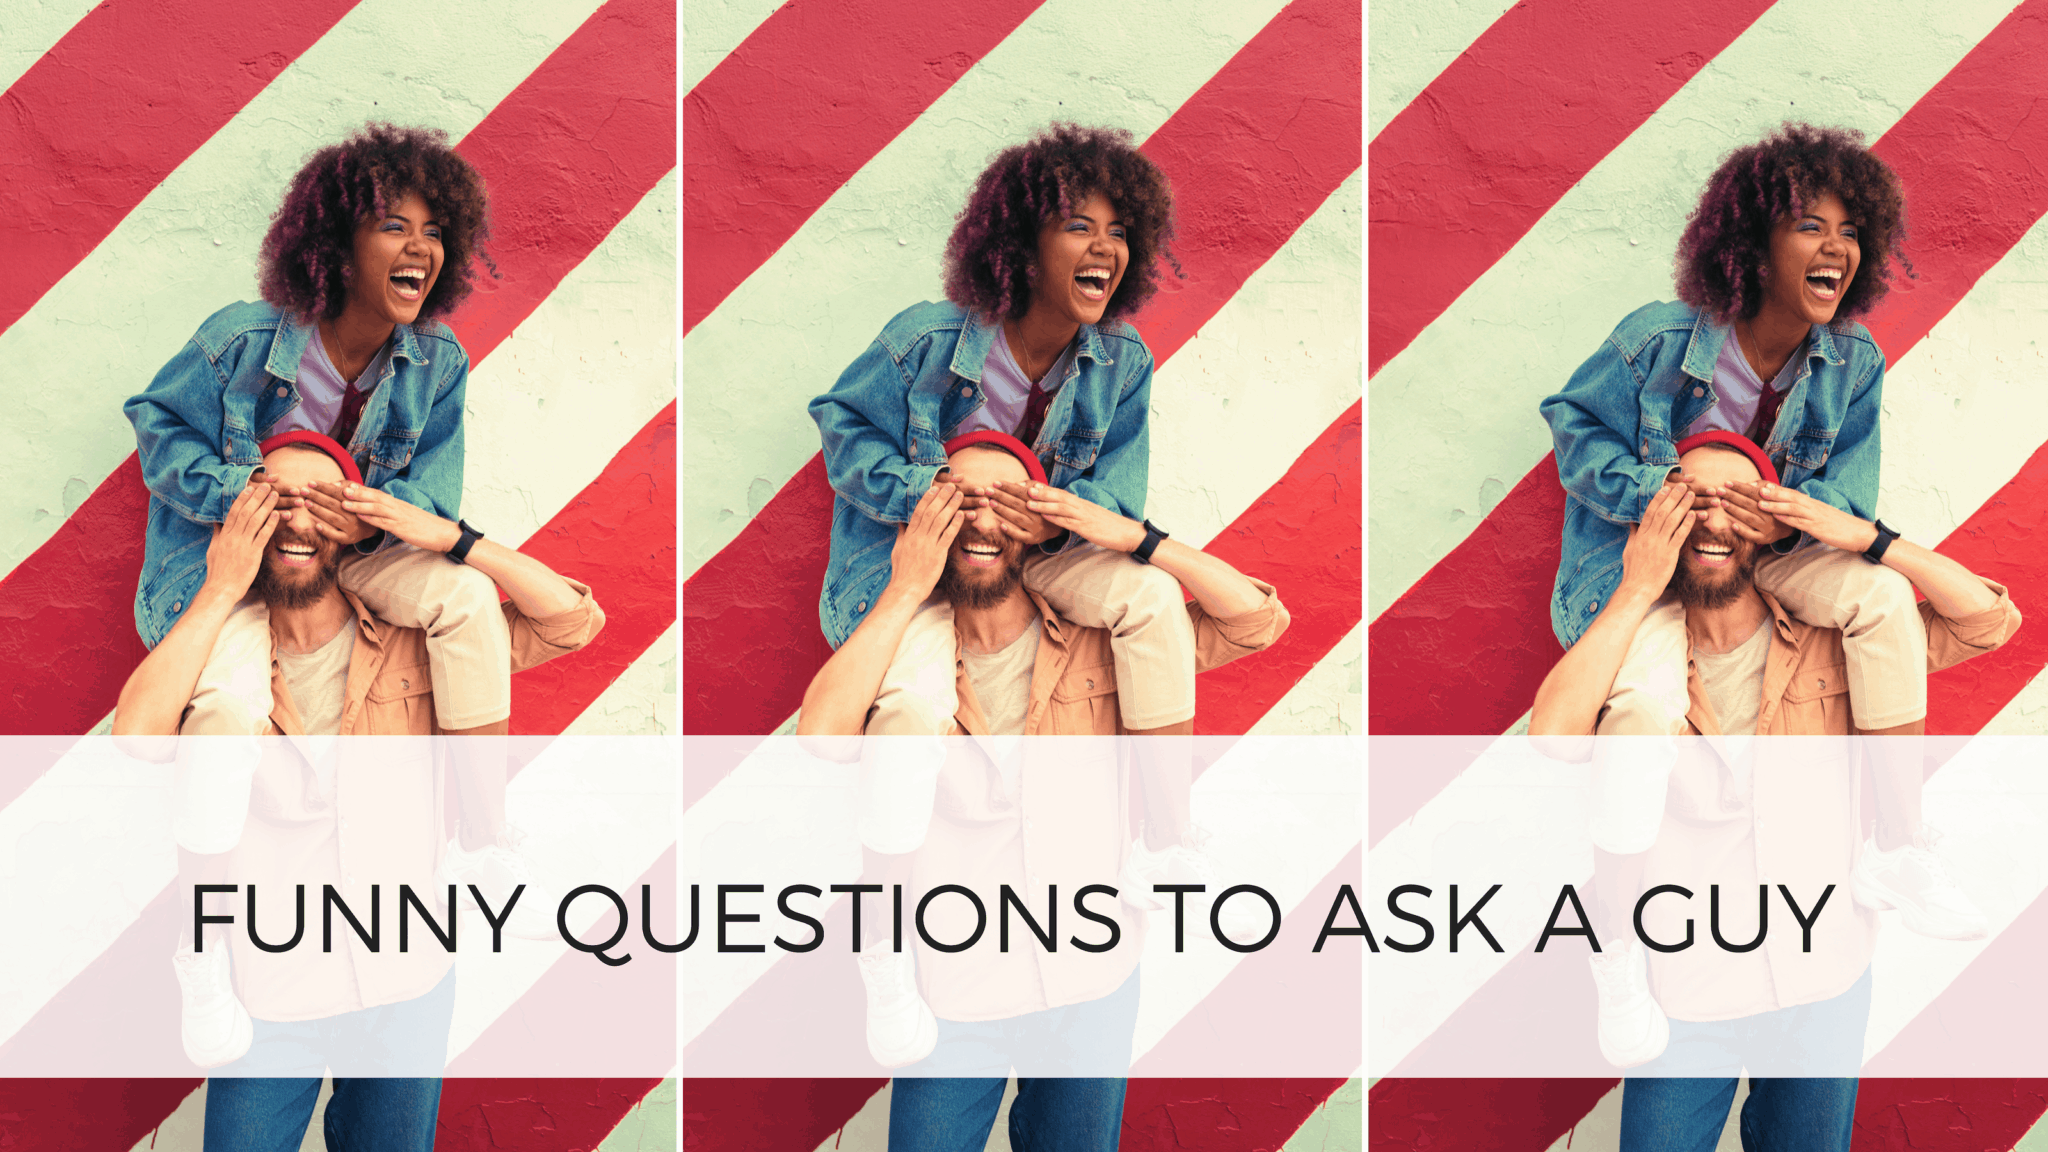 100 Funny Questions To Ask A Guy - By Sophia Lee